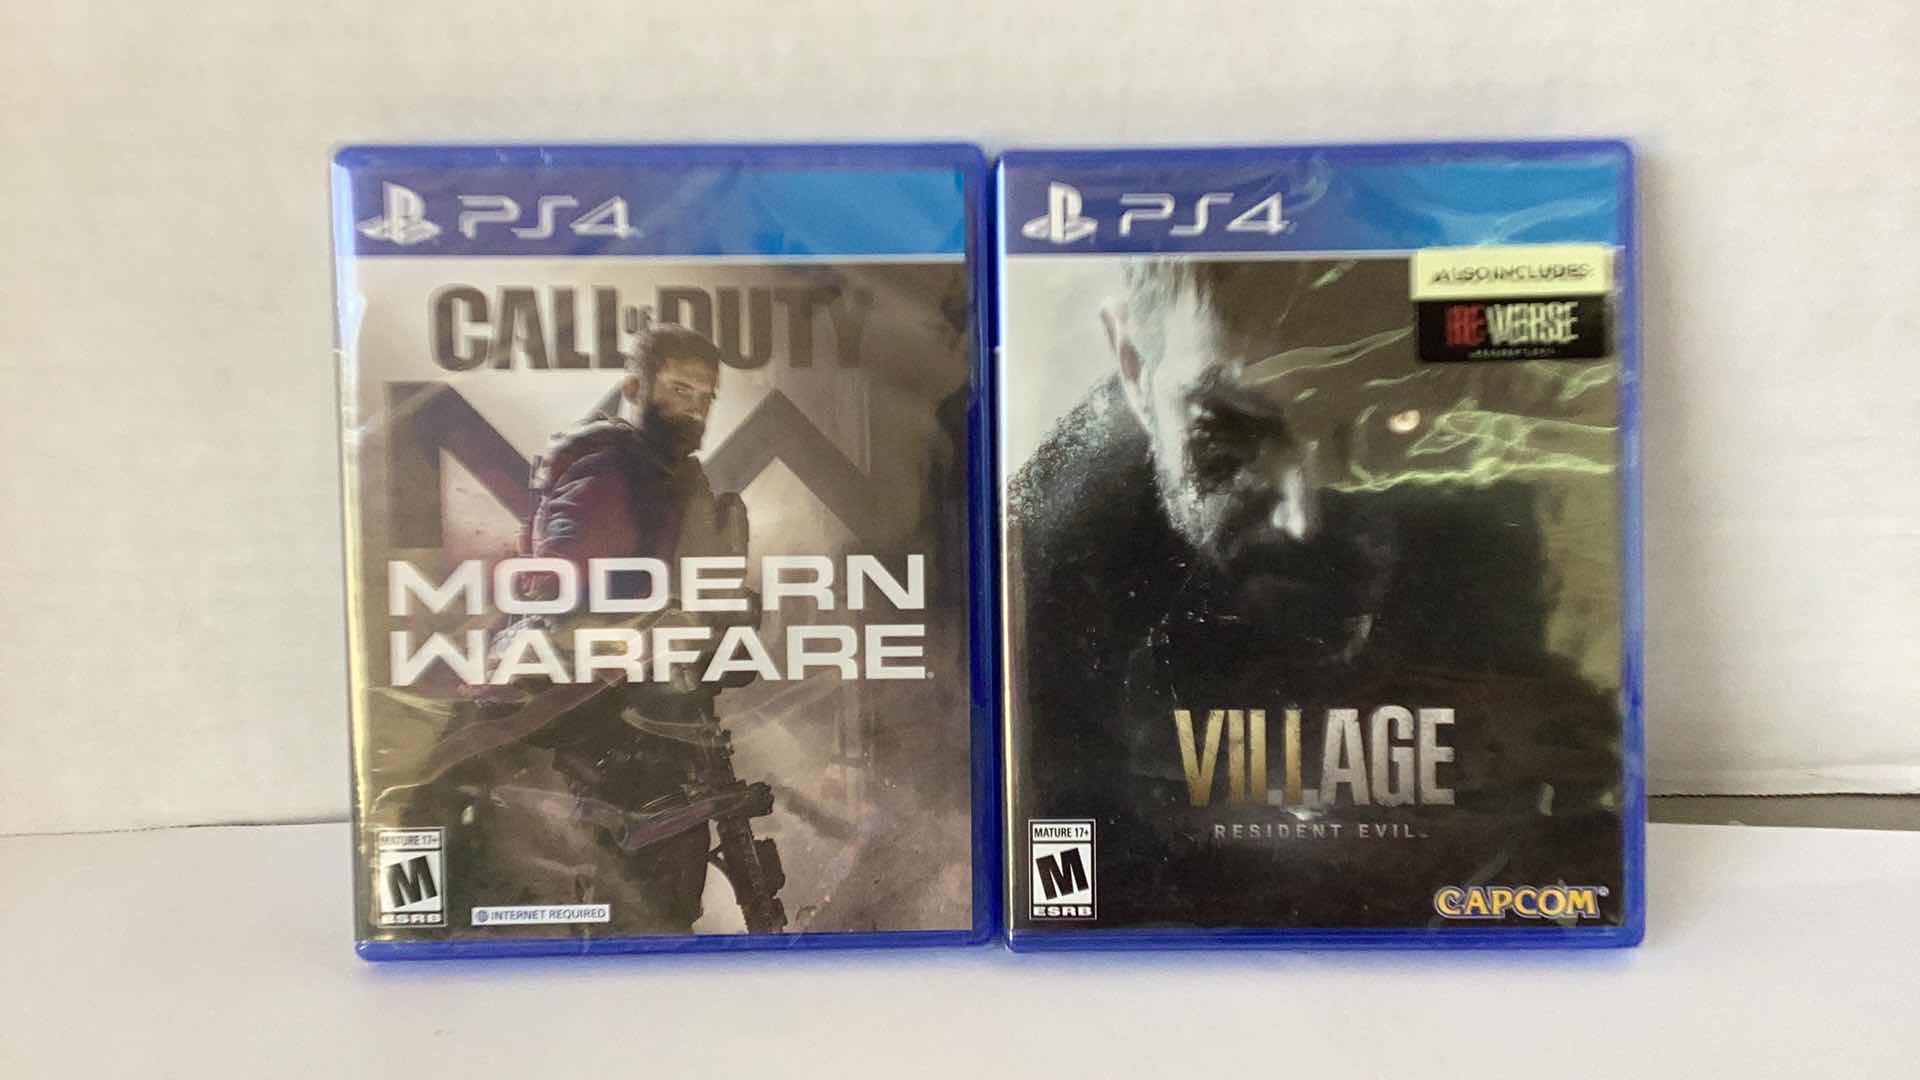 Photo 1 of 2 NEW PS4 GAMES: CALL OF DUTY MODERN WARFARE AND RESIDENT EVIL VILLAGE